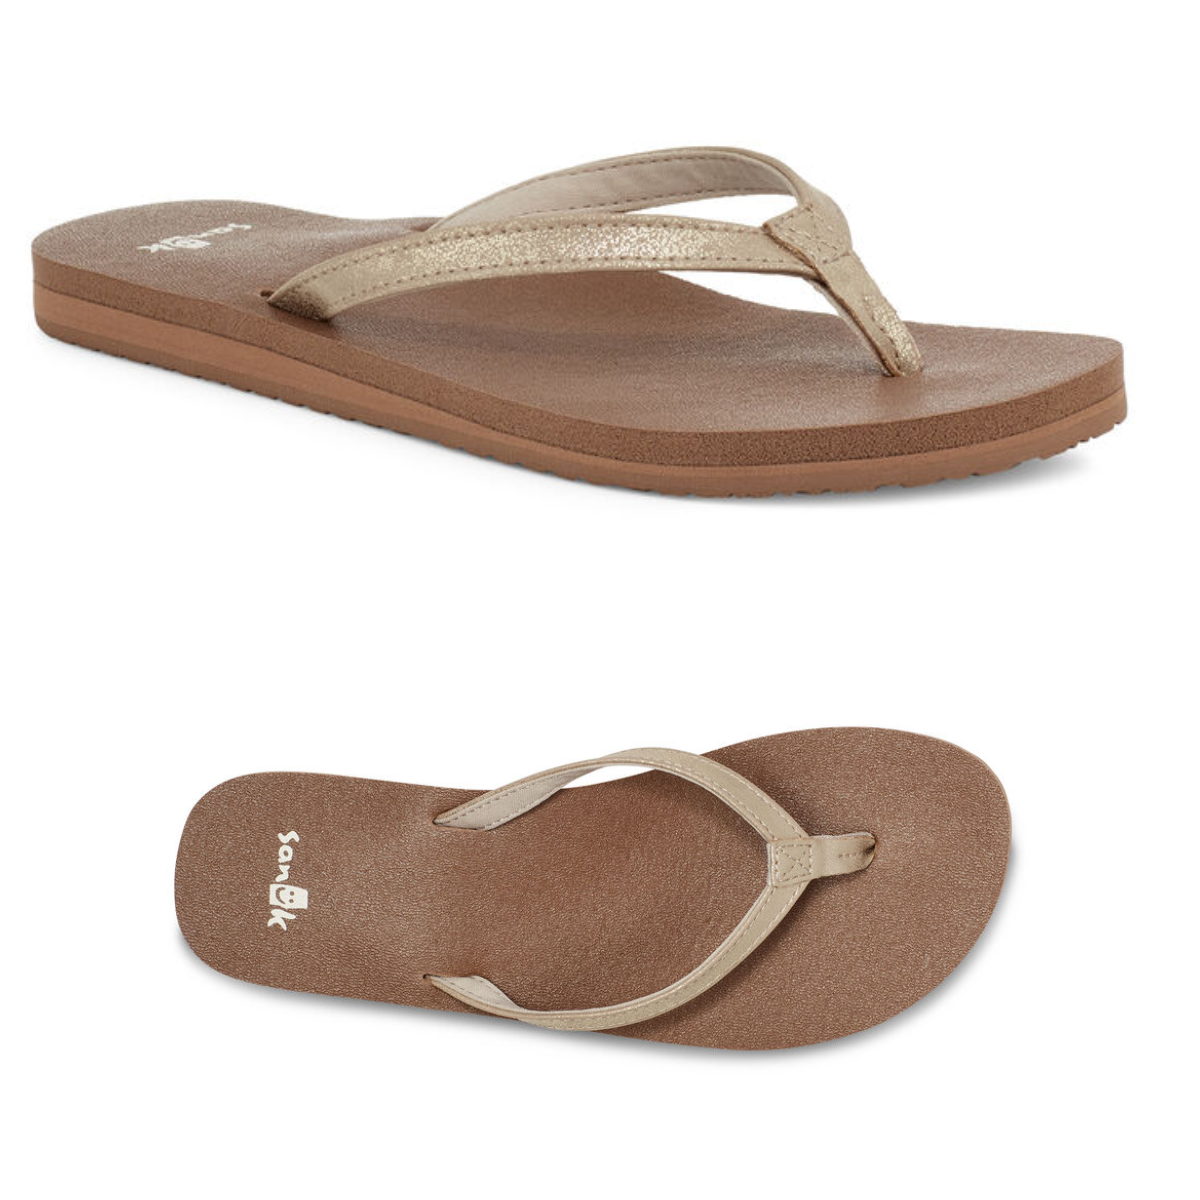 A pair of Yoga Joy Ladies flip flops in shimmering Rosegold color from SANUK - DECKERS brand.